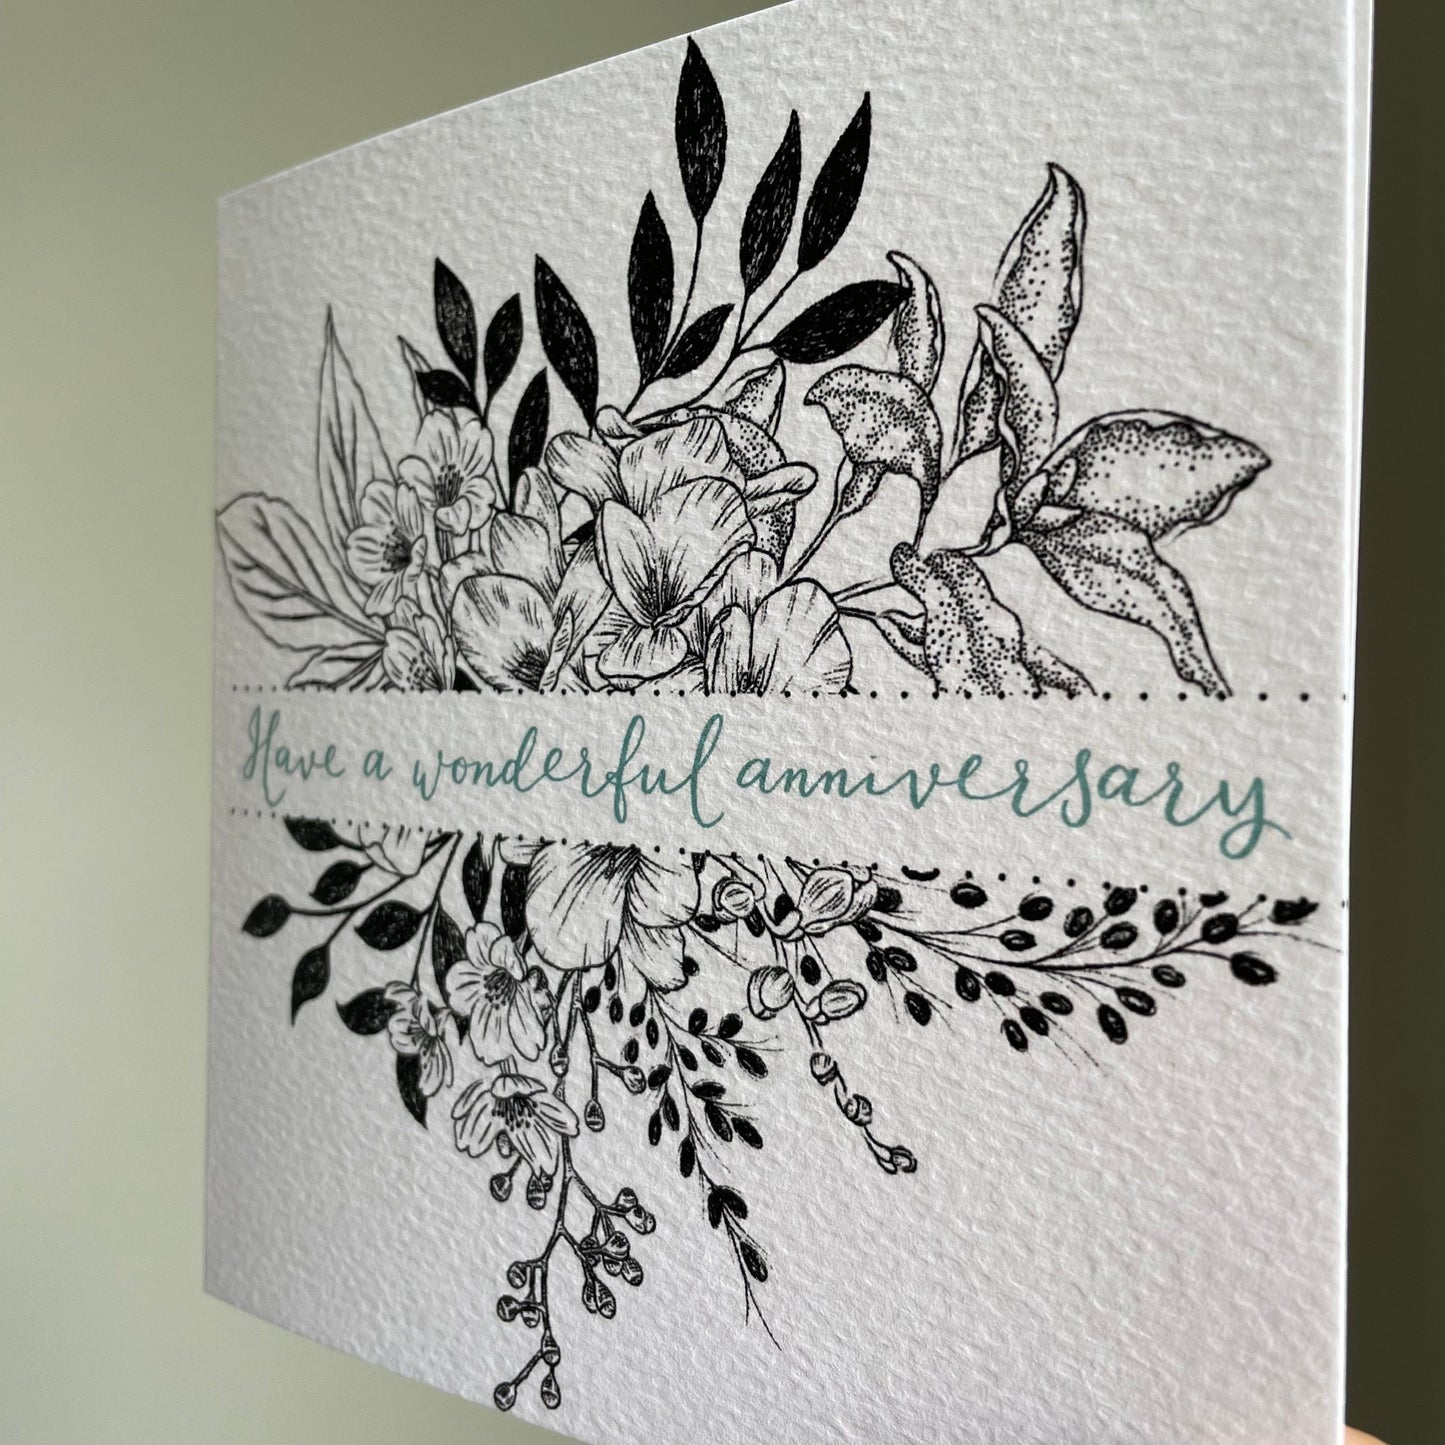 And Hope Designs Greeting & Note Cards Have a wonderful anniversary elegant textured card